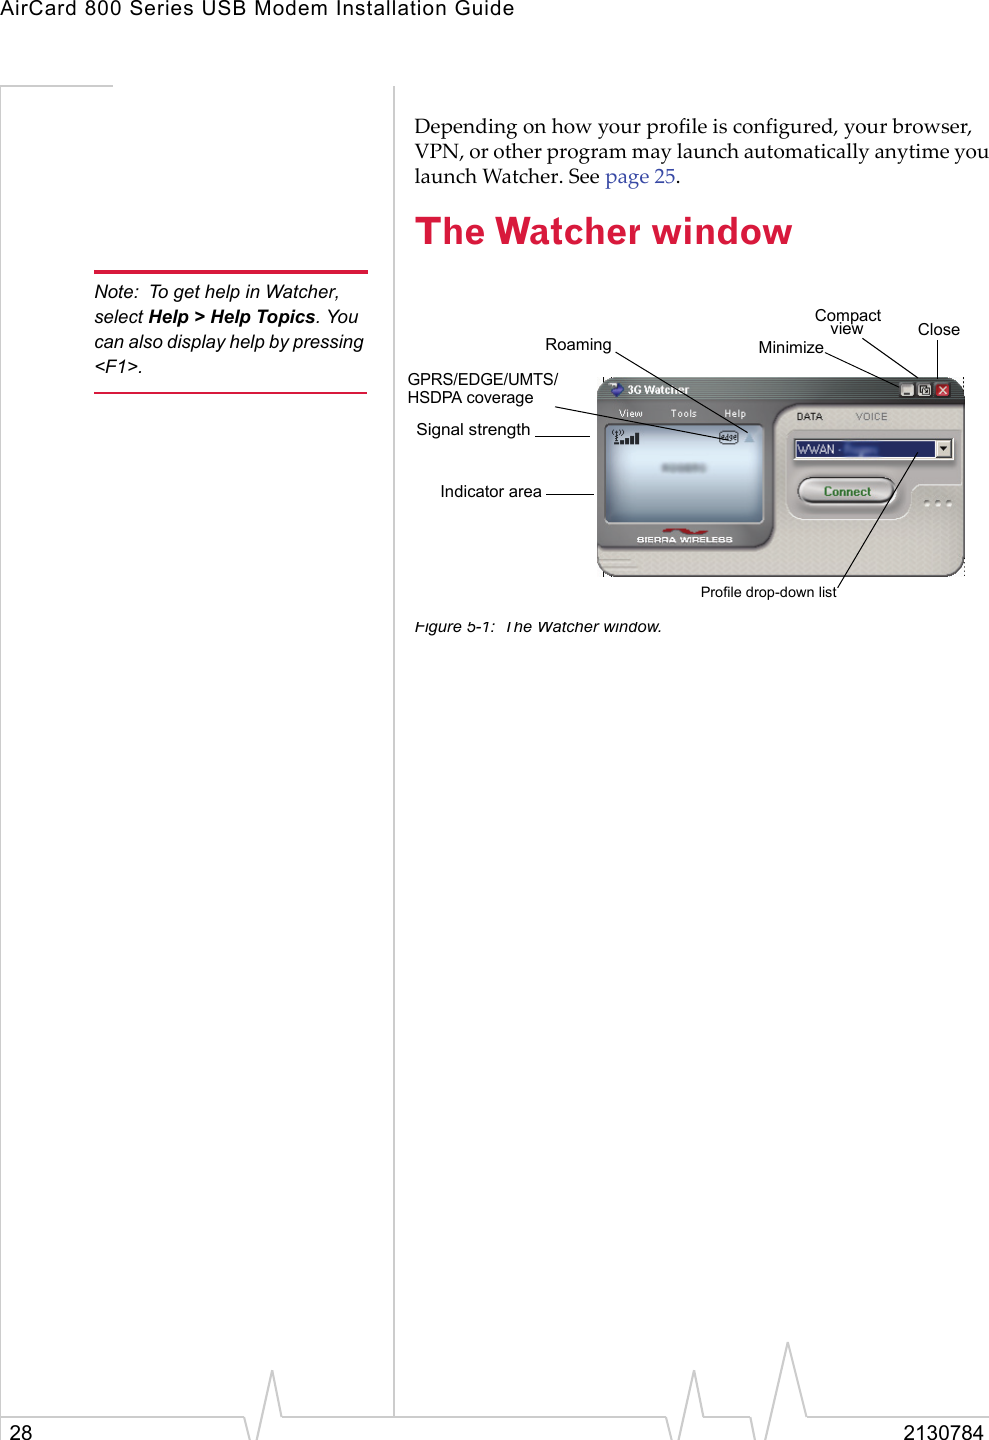 AirCard 800 Series USB Modem Installation Guide28 2130784Depending on how your profile is configured, your browser, VPN, or other program may launch automatically anytime you launch Watcher. See page 25.The Watcher windowNote: To get help in Watcher, select Help &gt; Help Topics. You can also display help by pressing &lt;F1&gt;.Figure 5-1: The Watcher window.Indicator areaRoamingGPRS/EDGE/UMTS/Compact CloseMinimizeviewSignal strengthHSDPA coverageProfile drop-down list